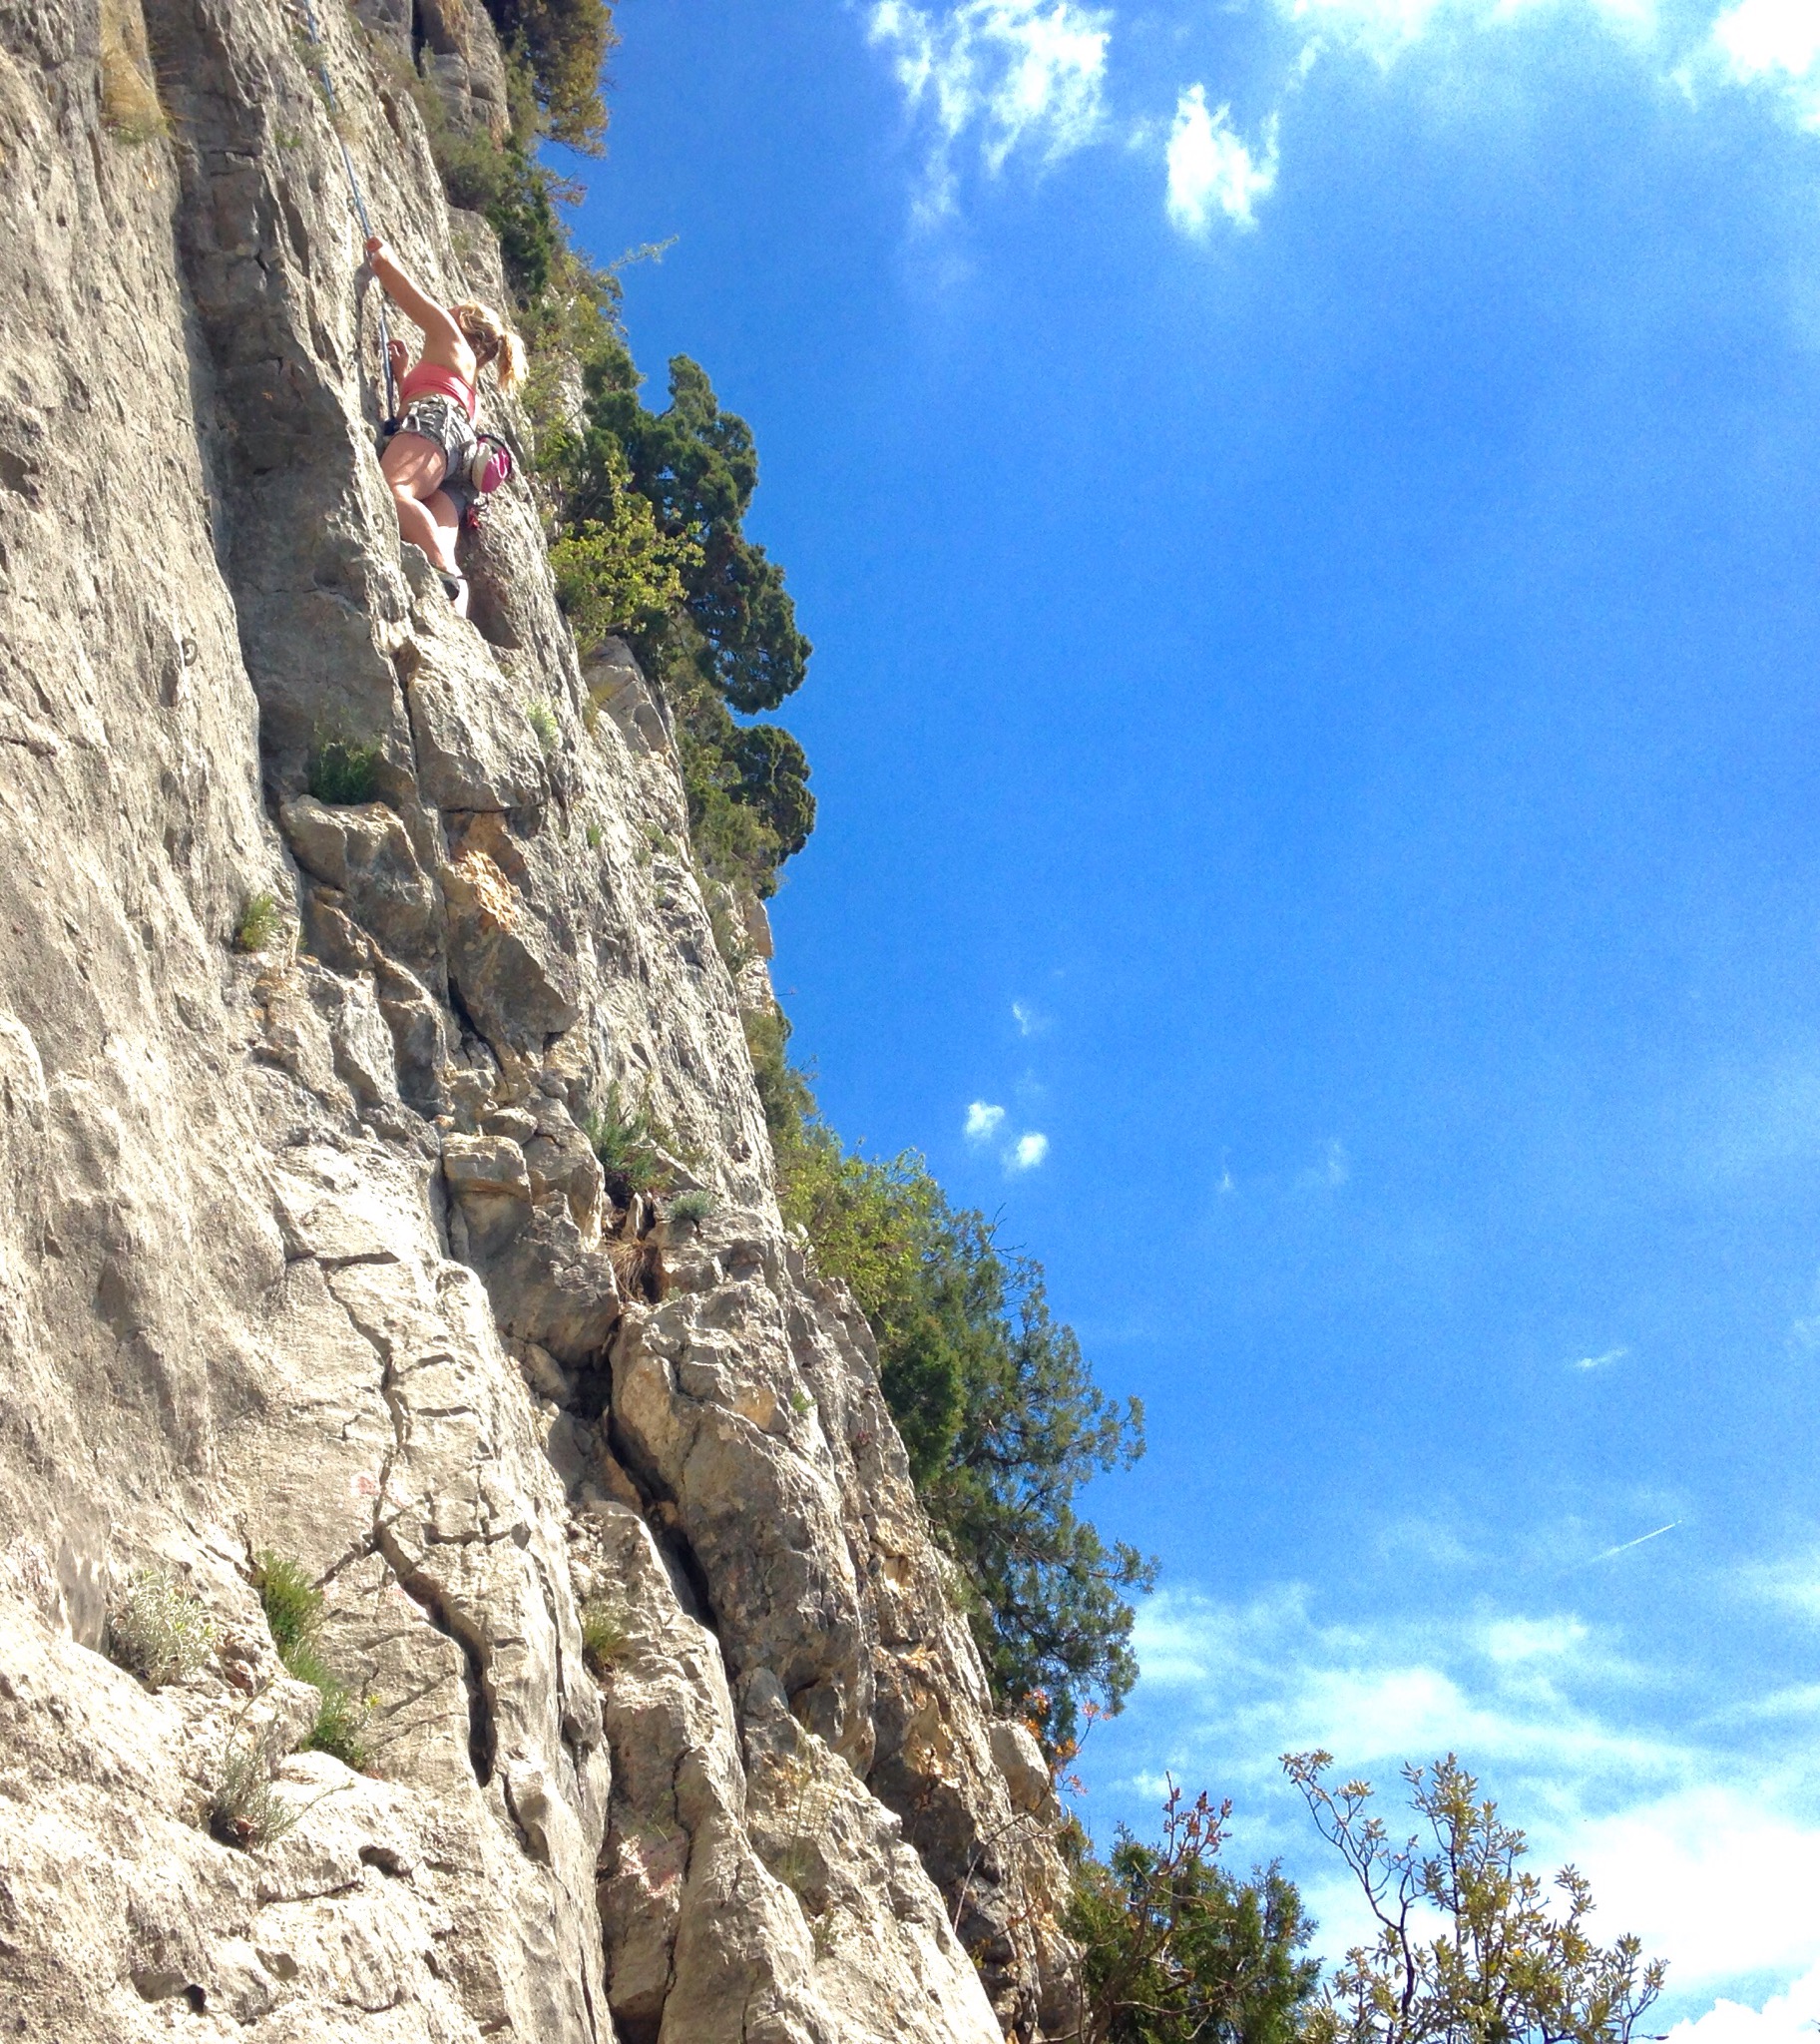 Warming up for the Verdon Gorge